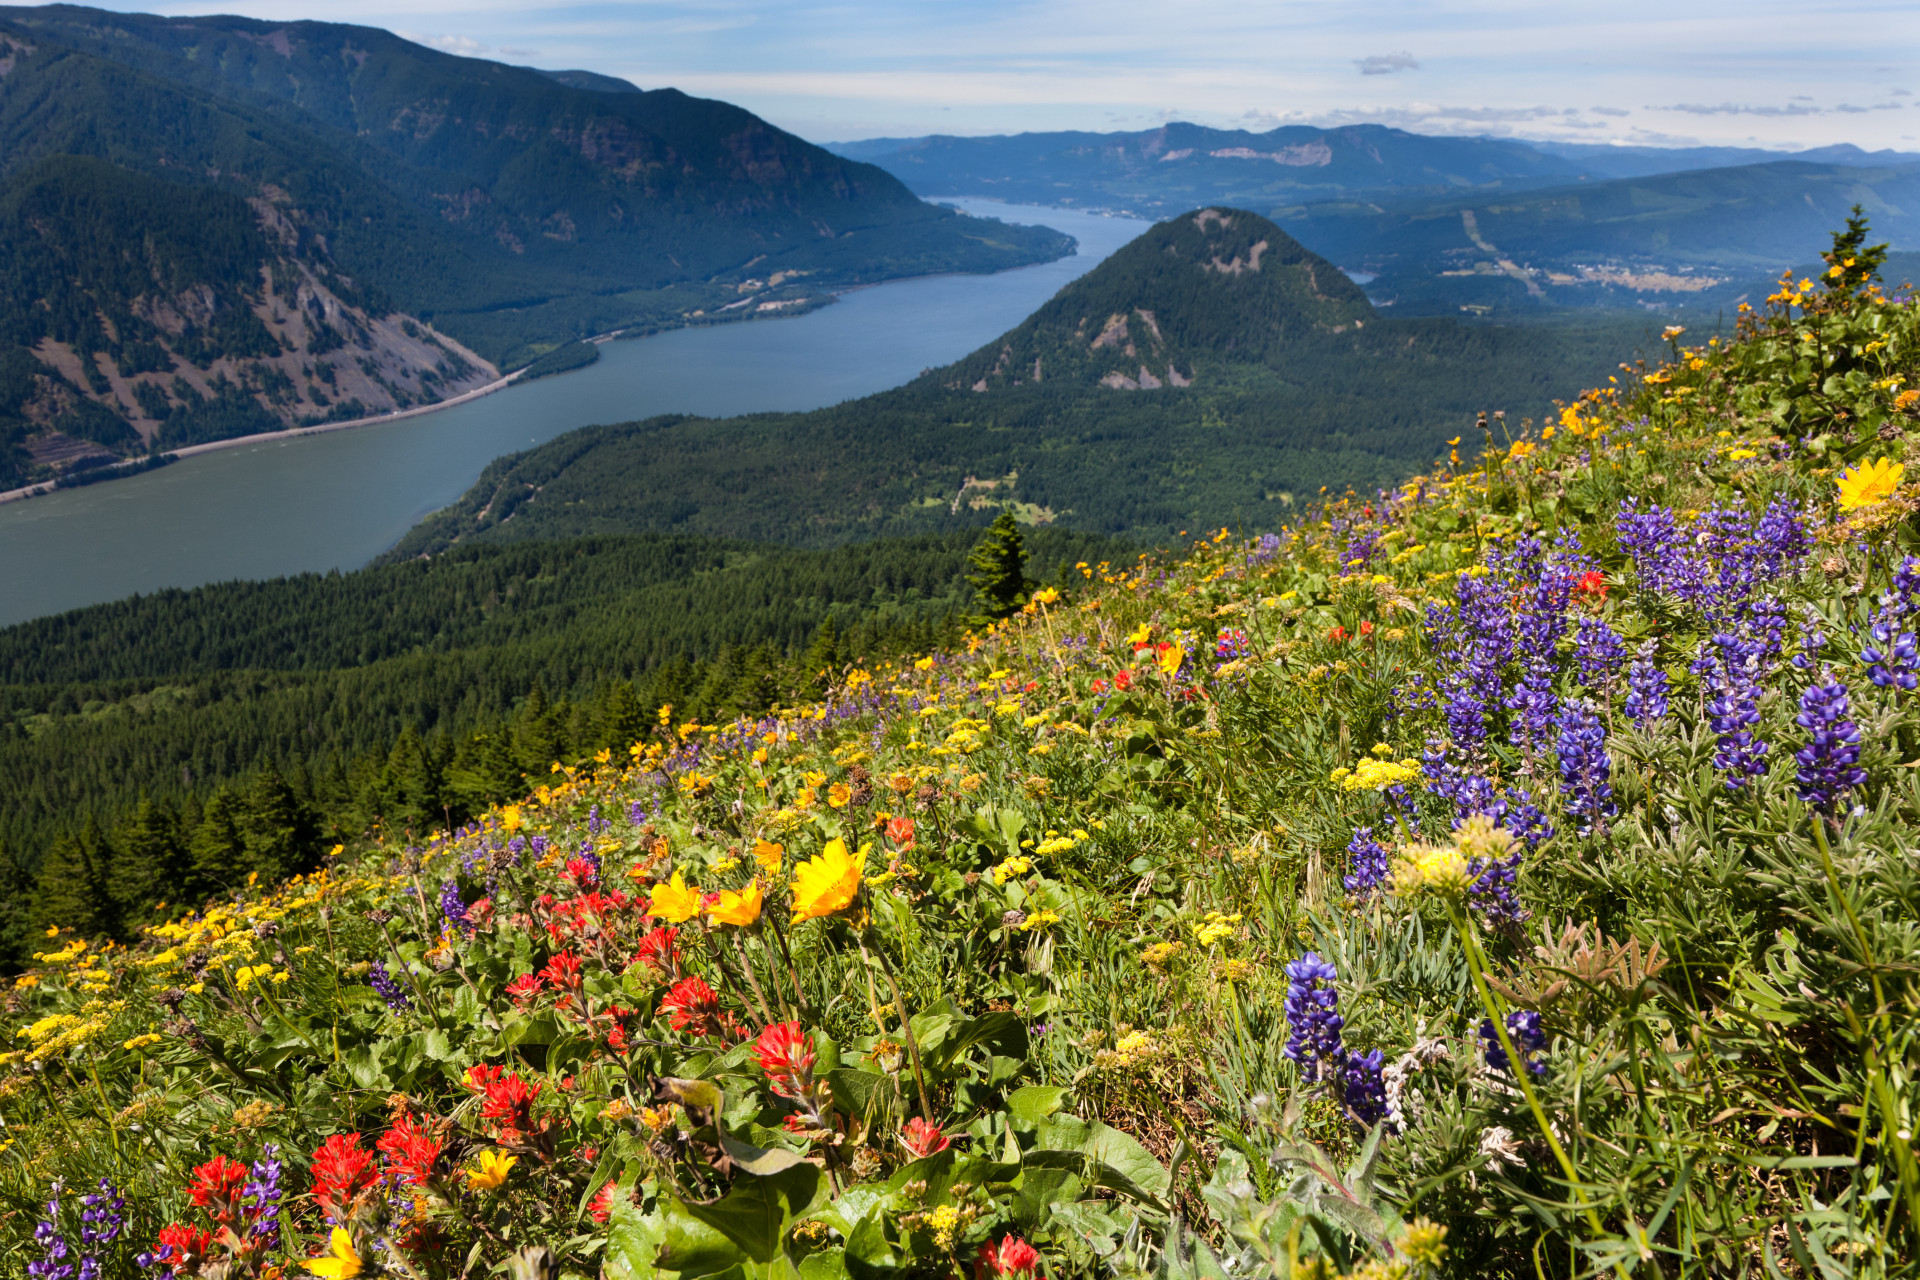 This picturesque trailhead overlooking Washington's lovely Columbia River Gorge looks as though it could be in 'The Sound of Music.' It is especially stunning during springtime when red, blue, and yellow wildflowers dot the cliffside.<p><a href="https://www.msn.com/en-us/community/channel/vid-7xx8mnucu55yw63we9va2gwr7uihbxwc68fxqp25x6tg4ftibpra?cvid=94631541bc0f4f89bfd59158d696ad7e">Follow us and access great exclusive content every day</a></p>